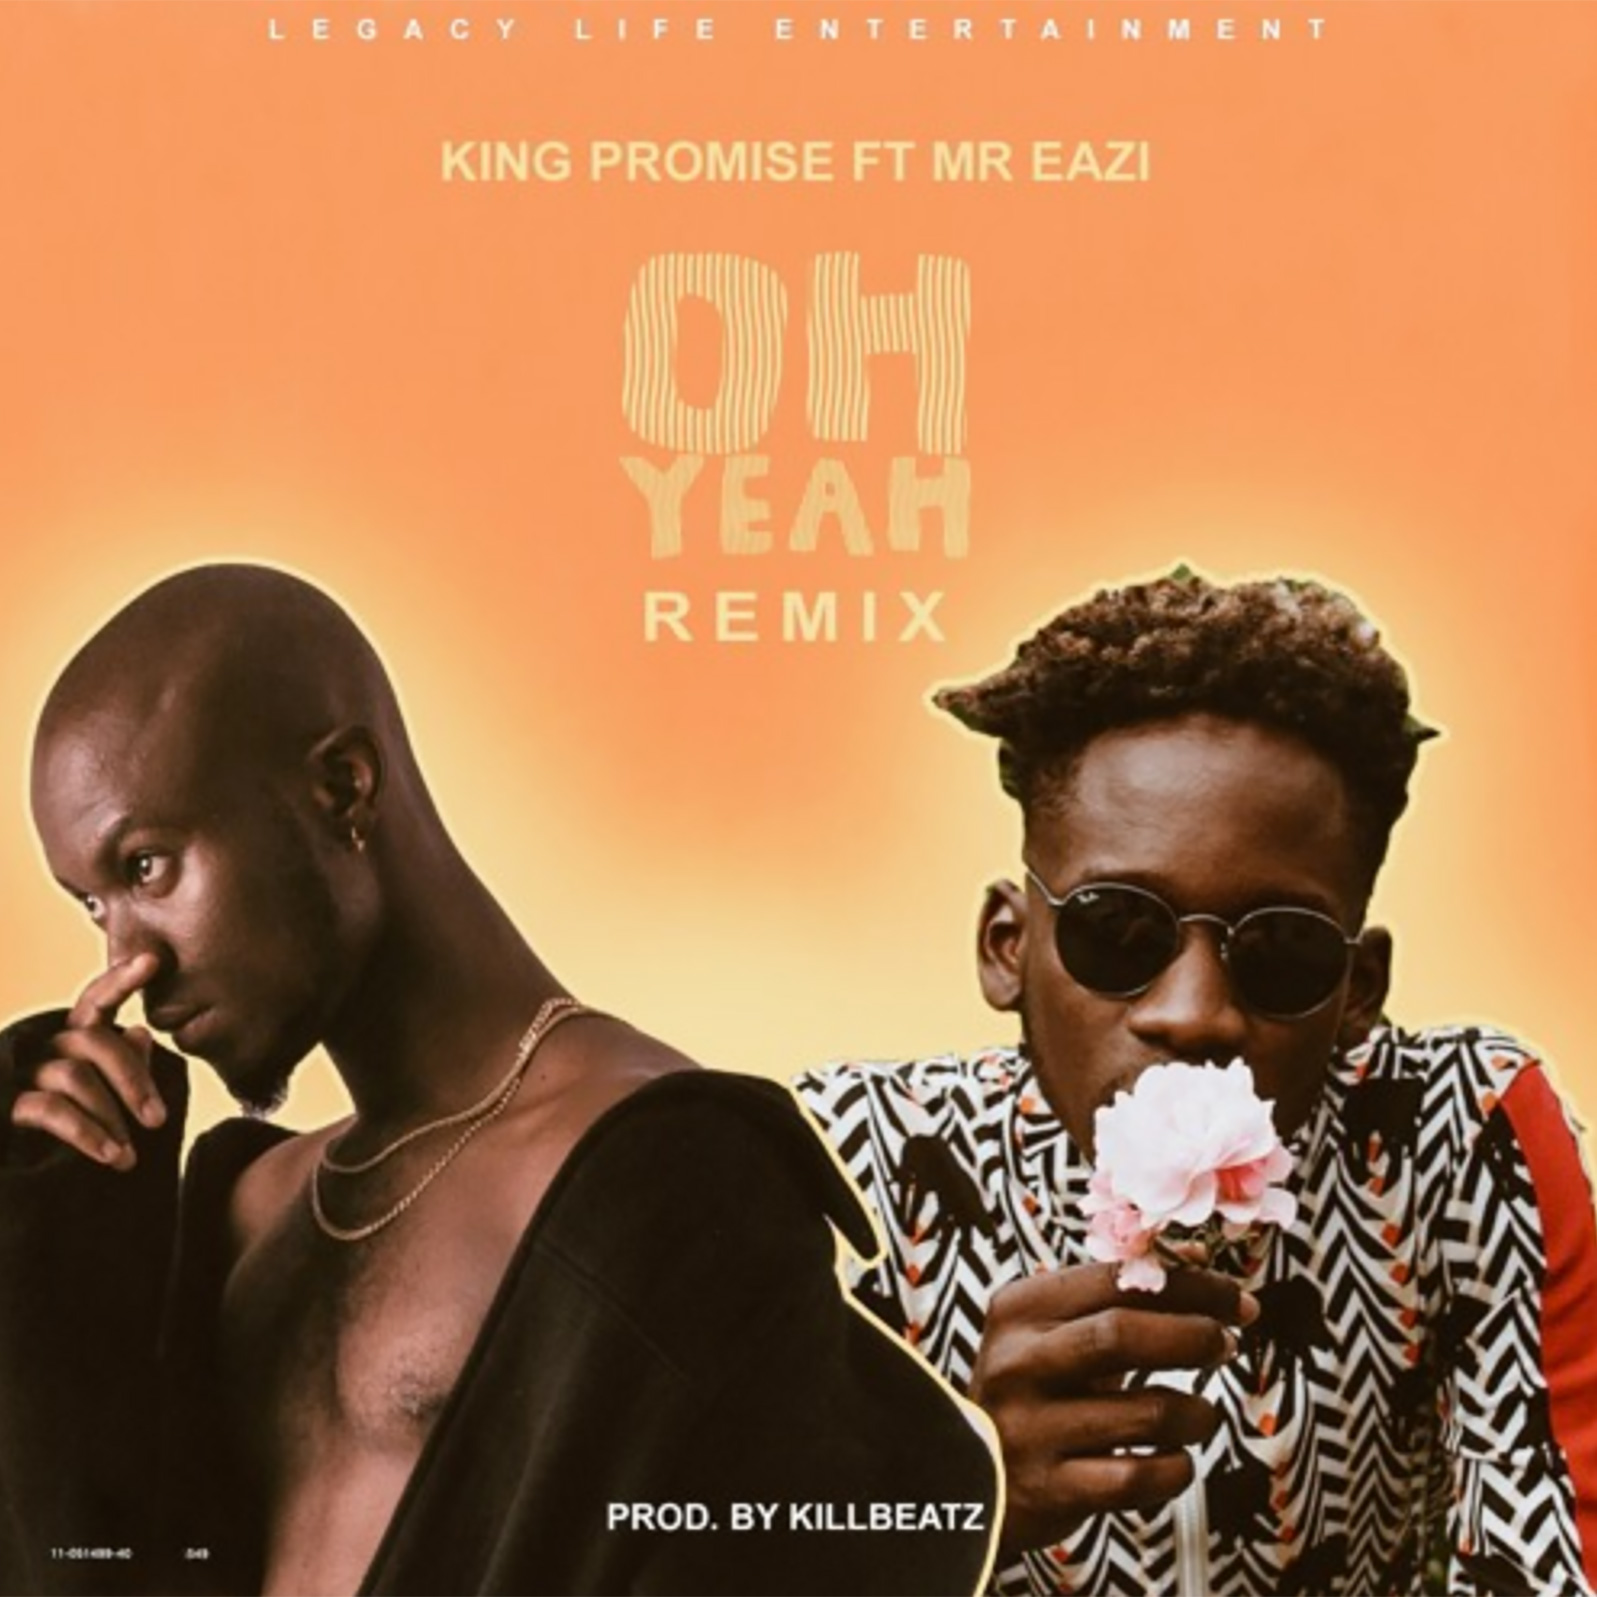 Oh Yeah remix by King Promise feat. Mr Eazi